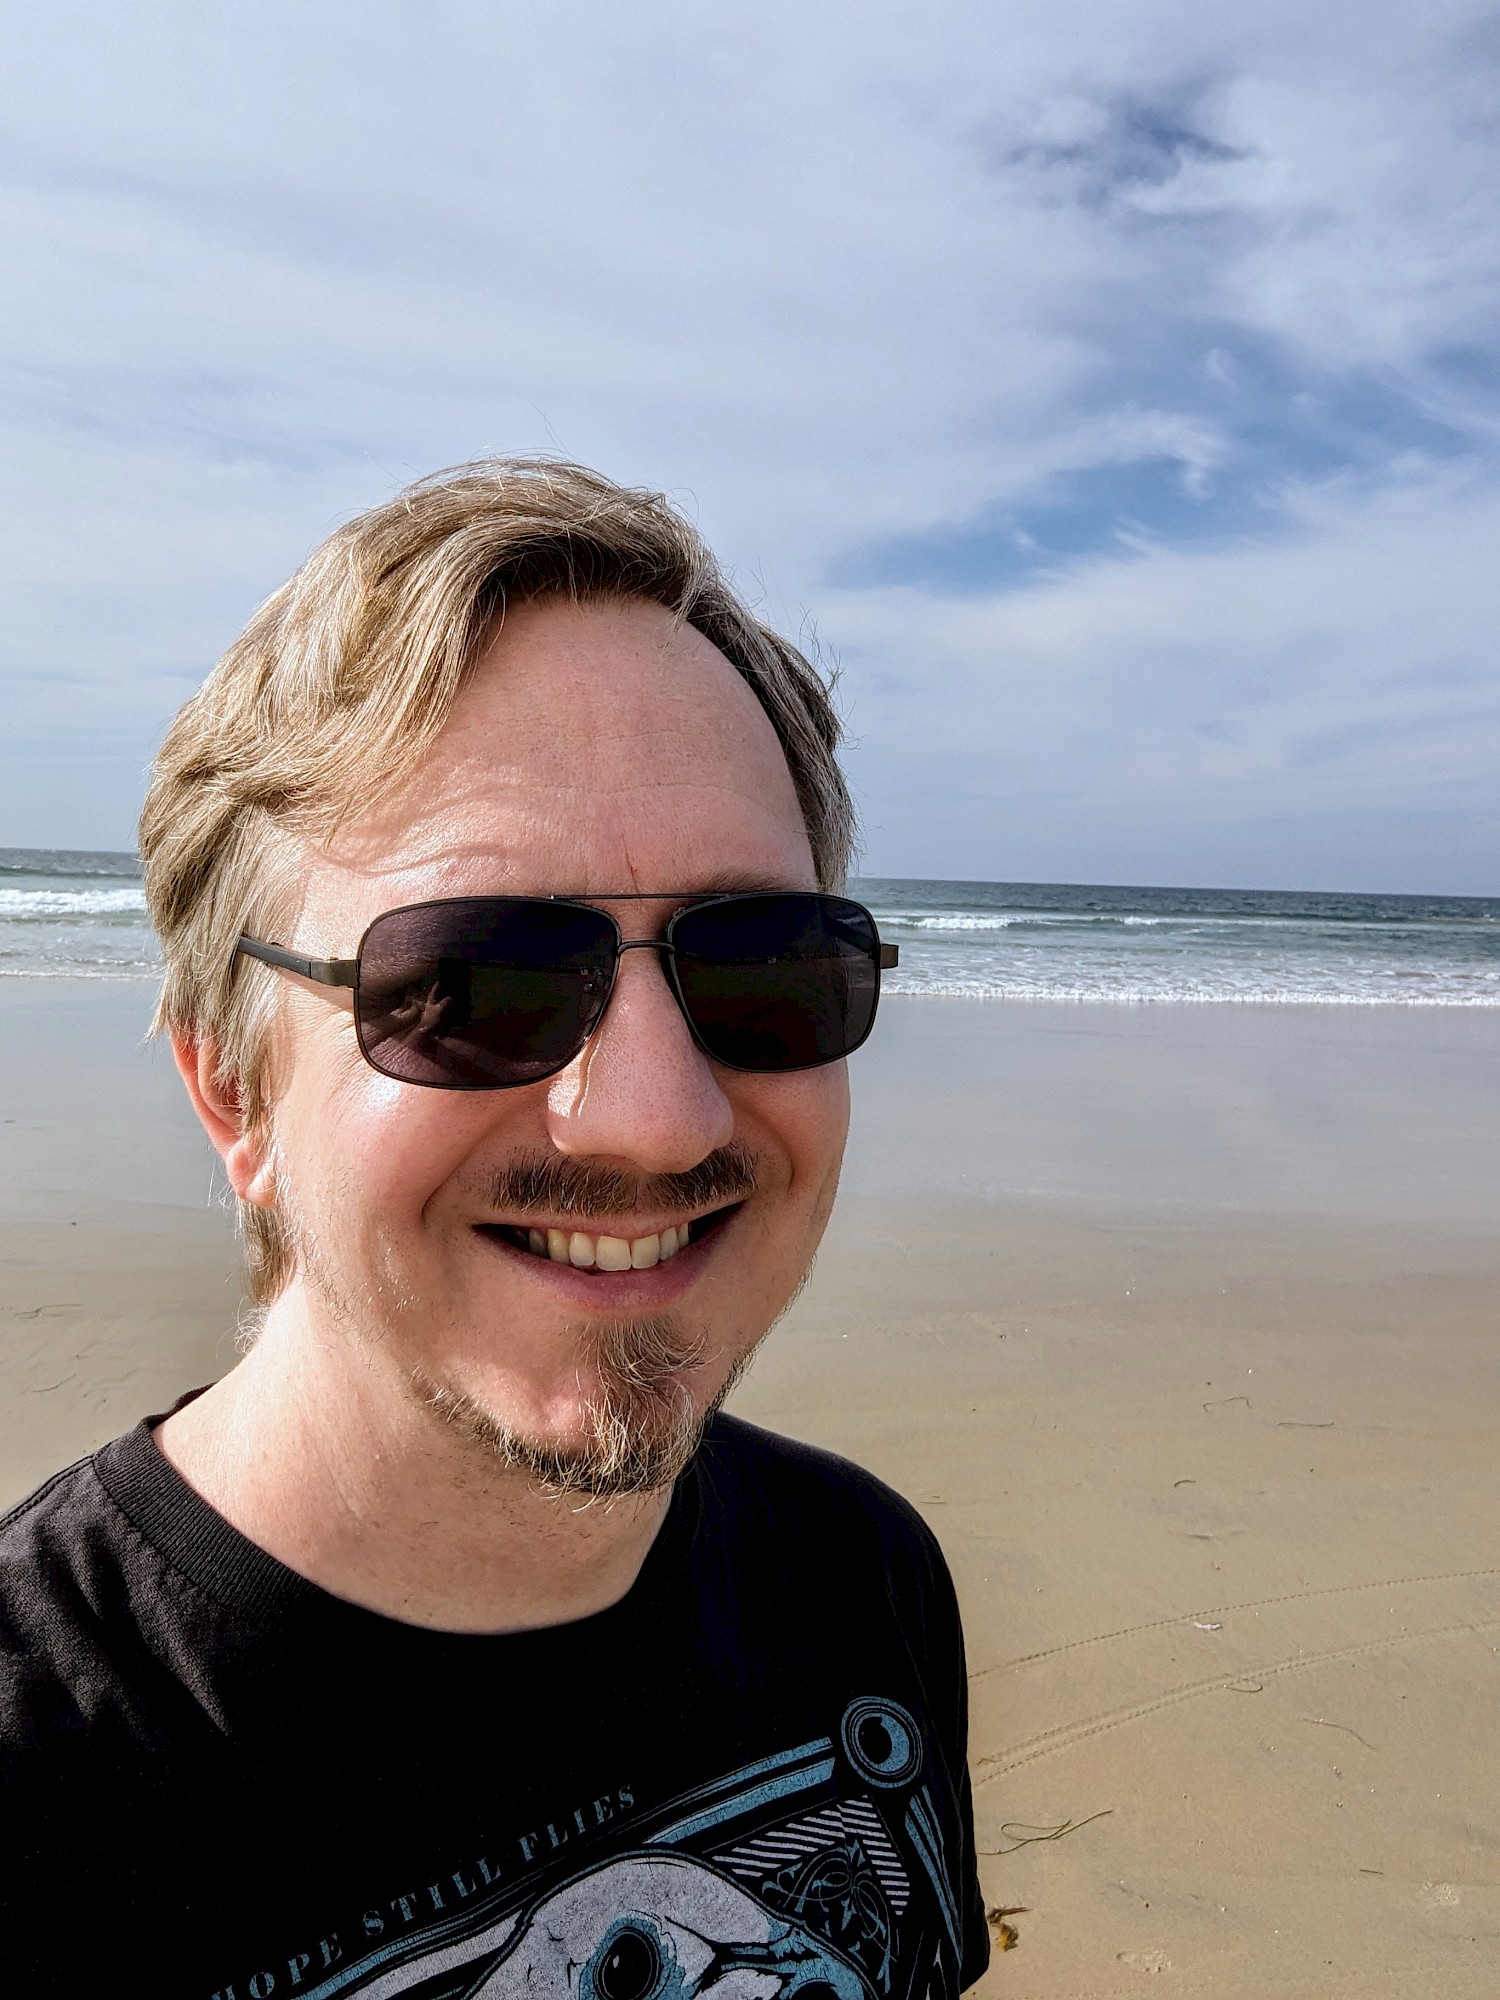 A smiling selfie at the beach with the ocean in the background. I'm wearing a black Five Iron Frenzy t-shirt with text "Hope Still Flies" and dark sunglasses.